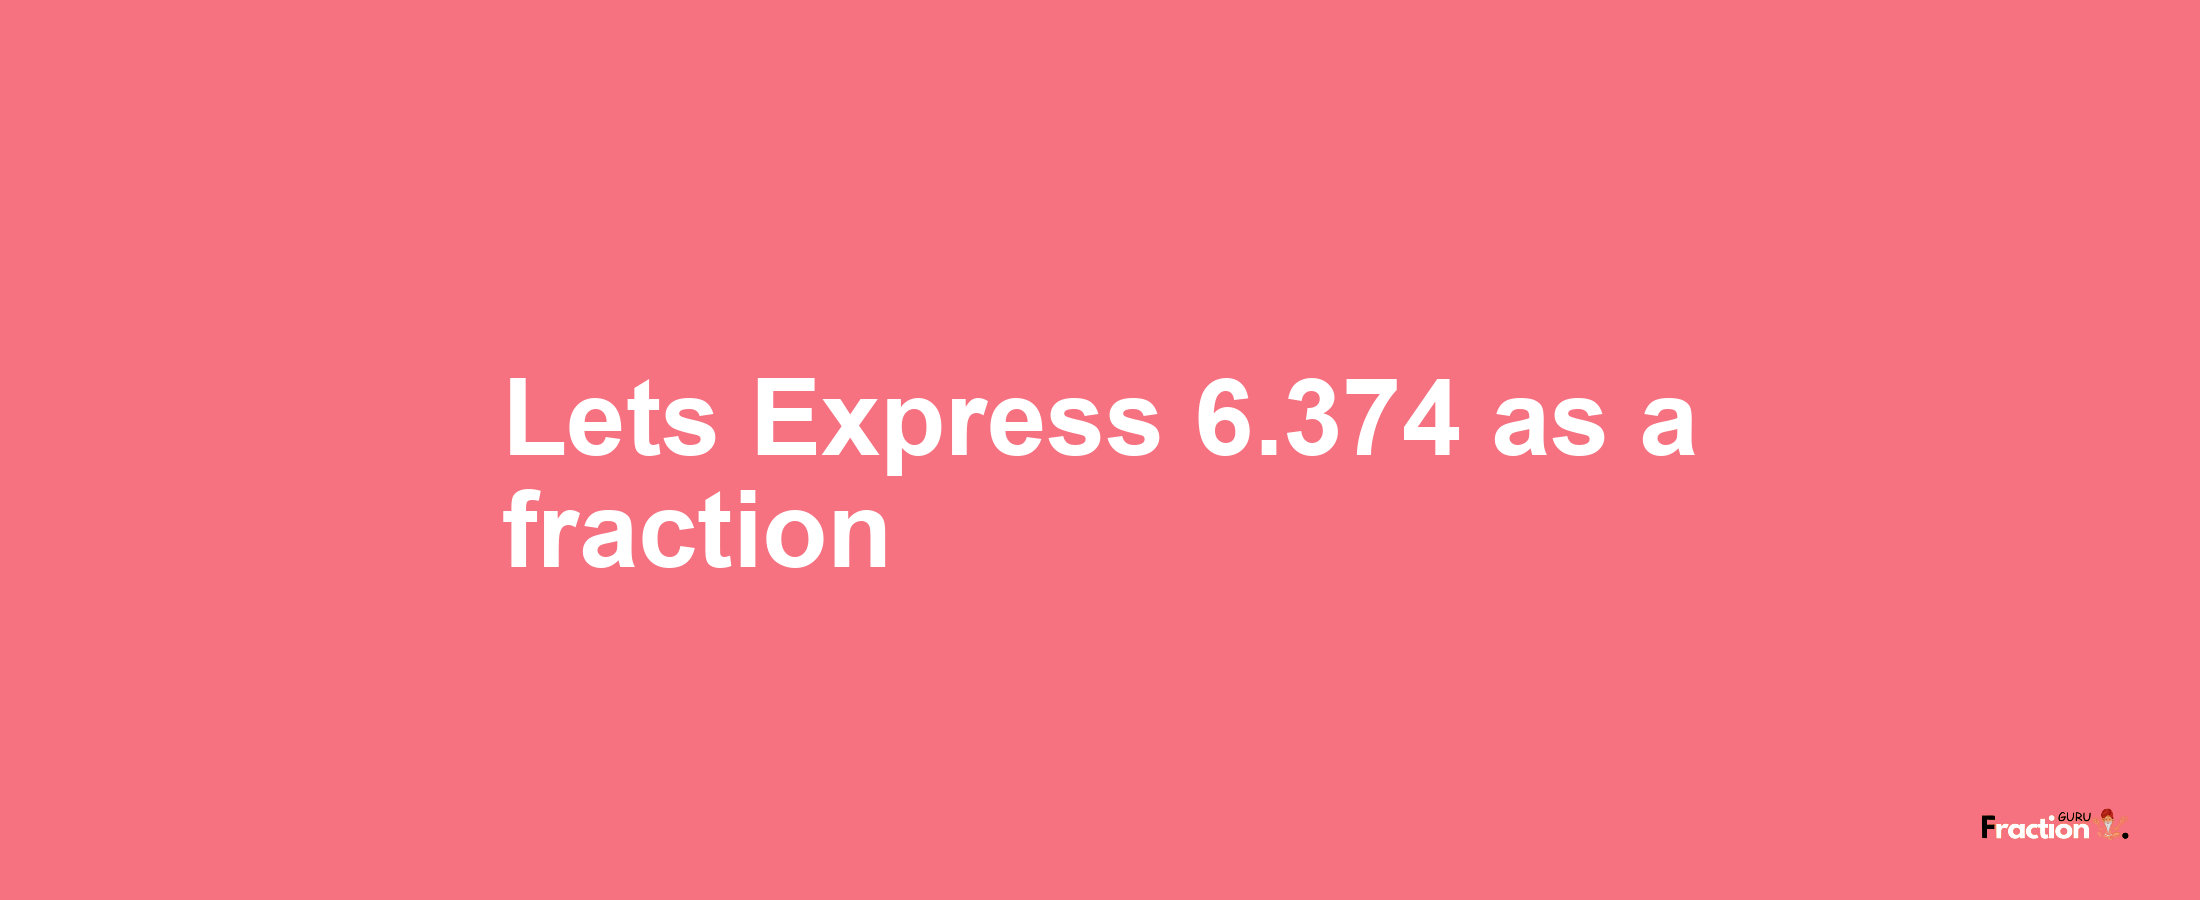 Lets Express 6.374 as afraction